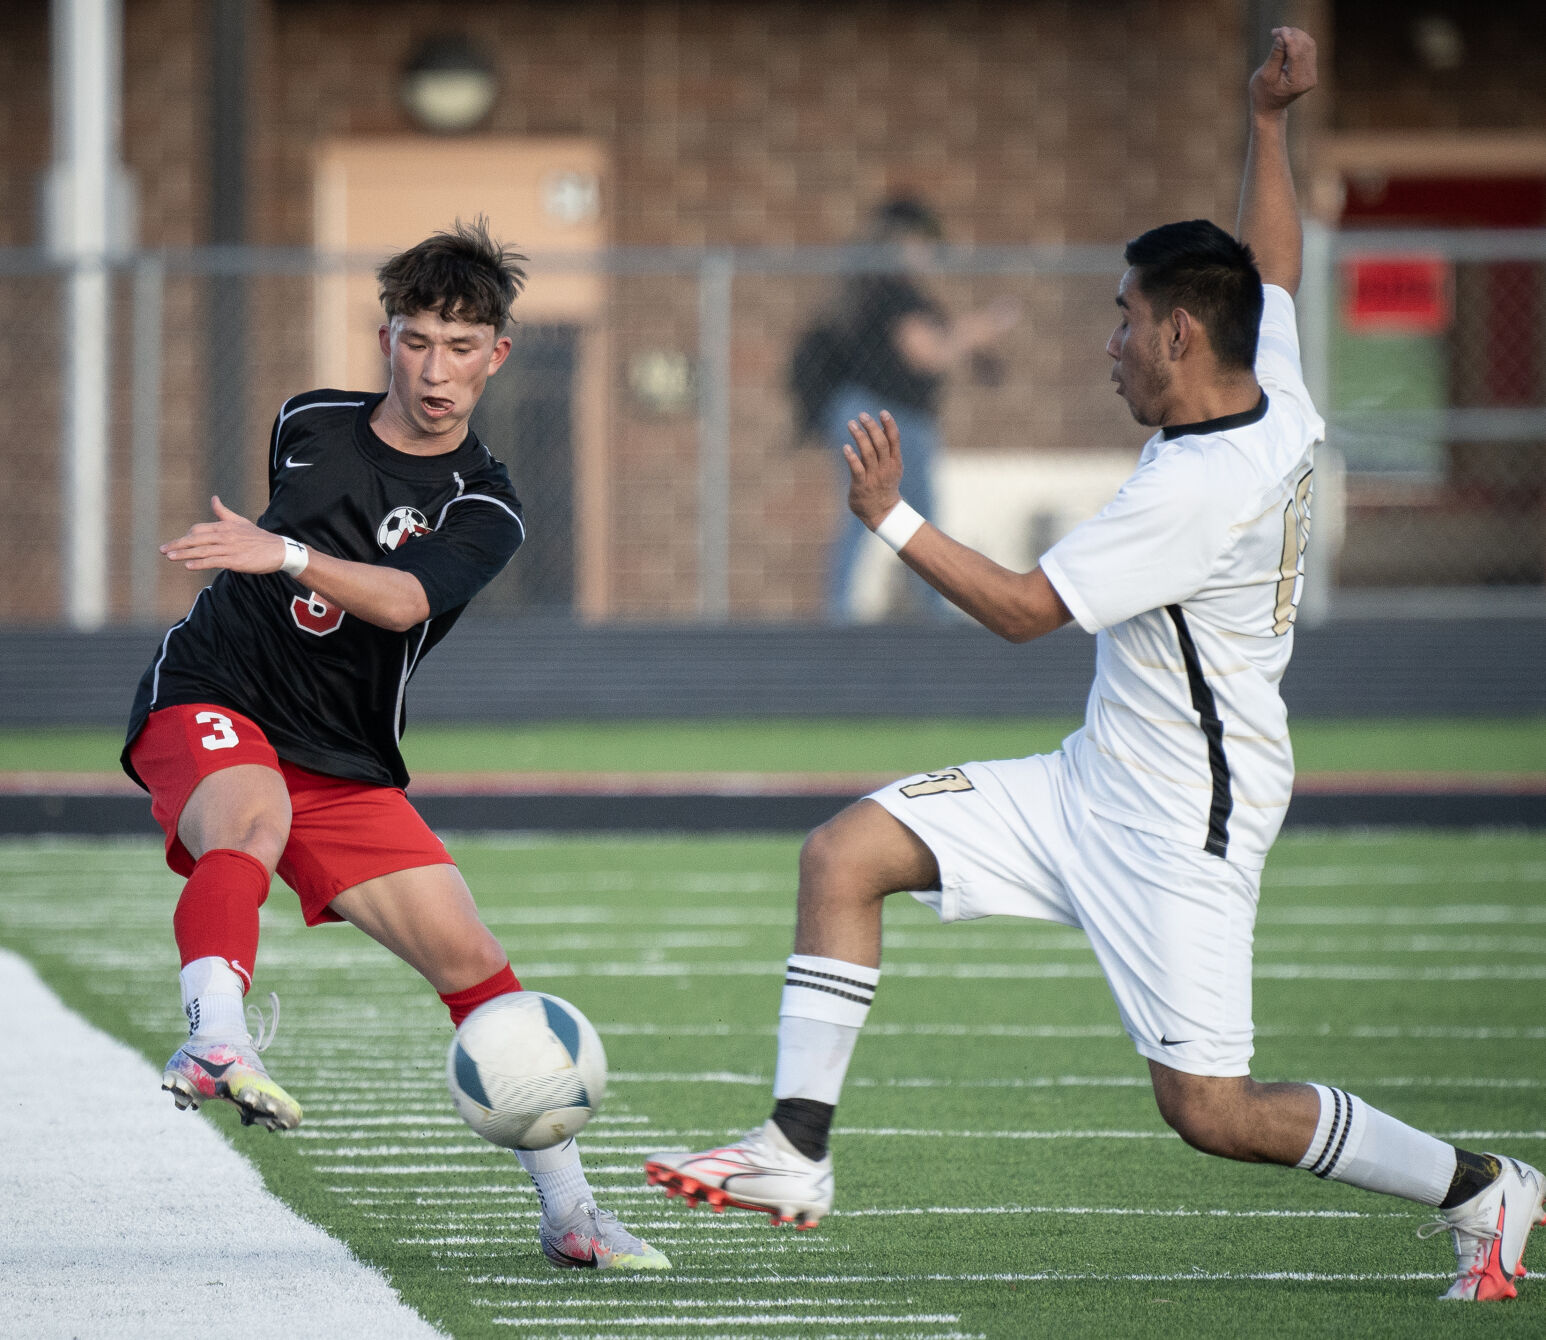 Central Dominates Cheyenne South in 4-0 Victory with Custis and Black Leading Goals